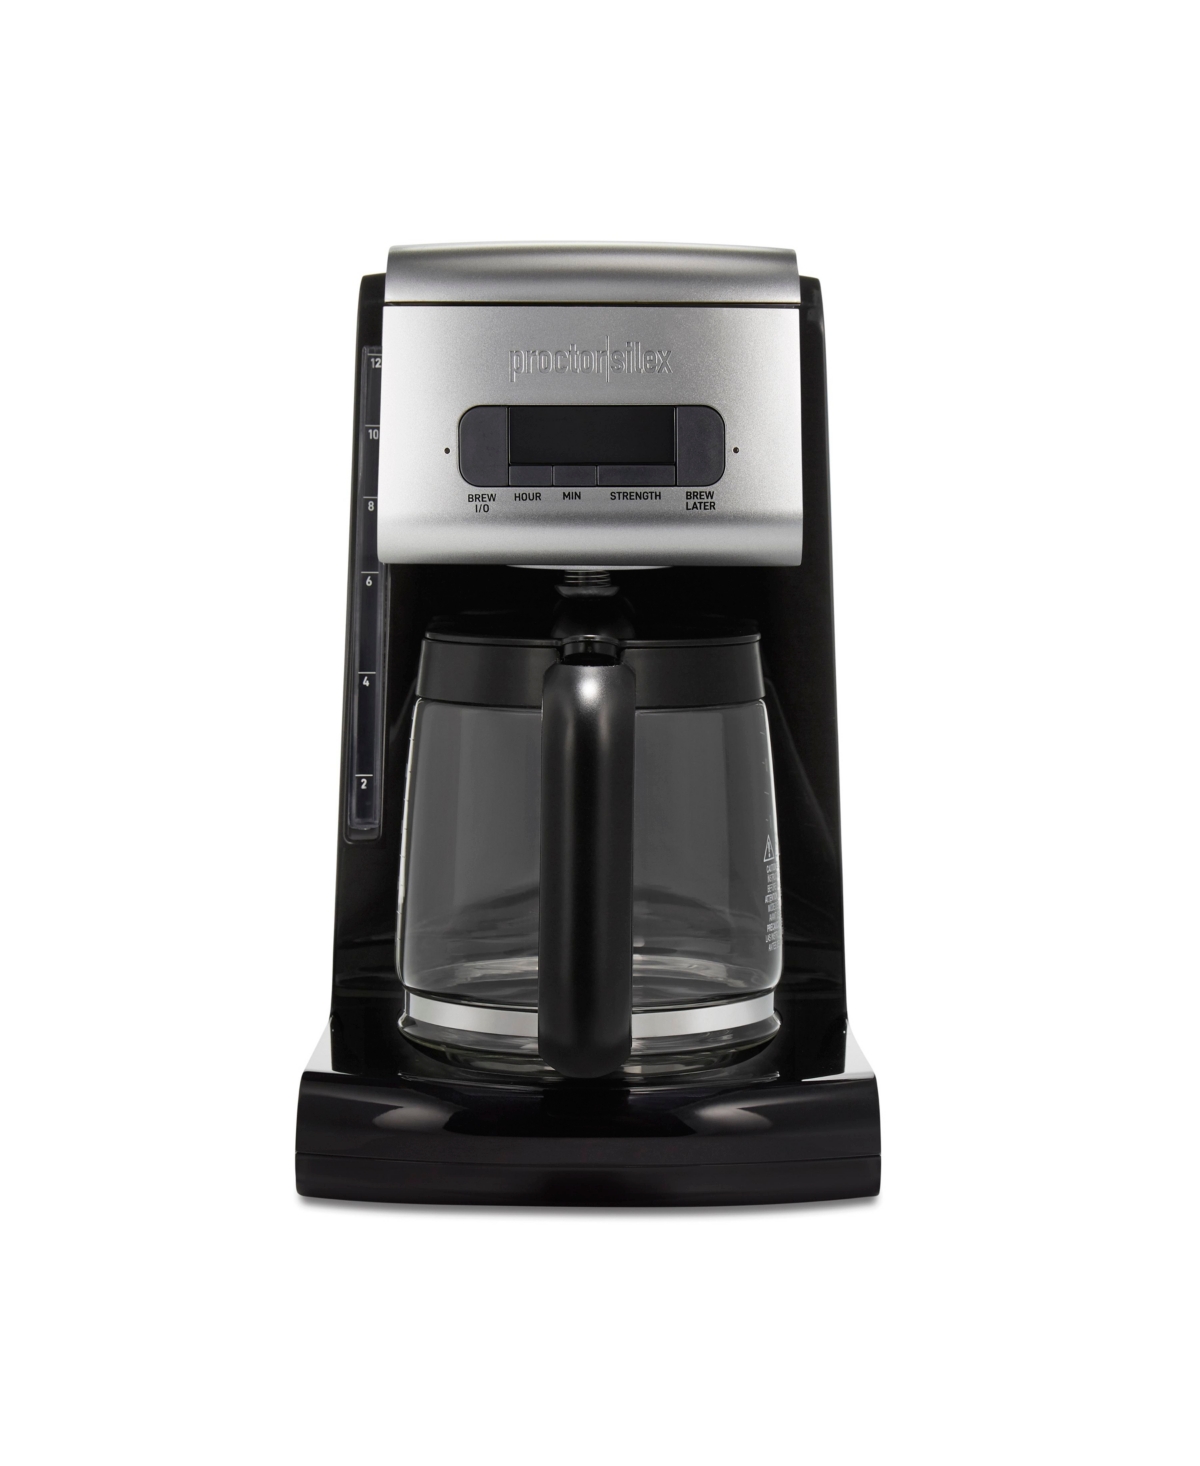 Proctor Silex Frontfill Programmable Coffee Maker In Black And Silver-tone